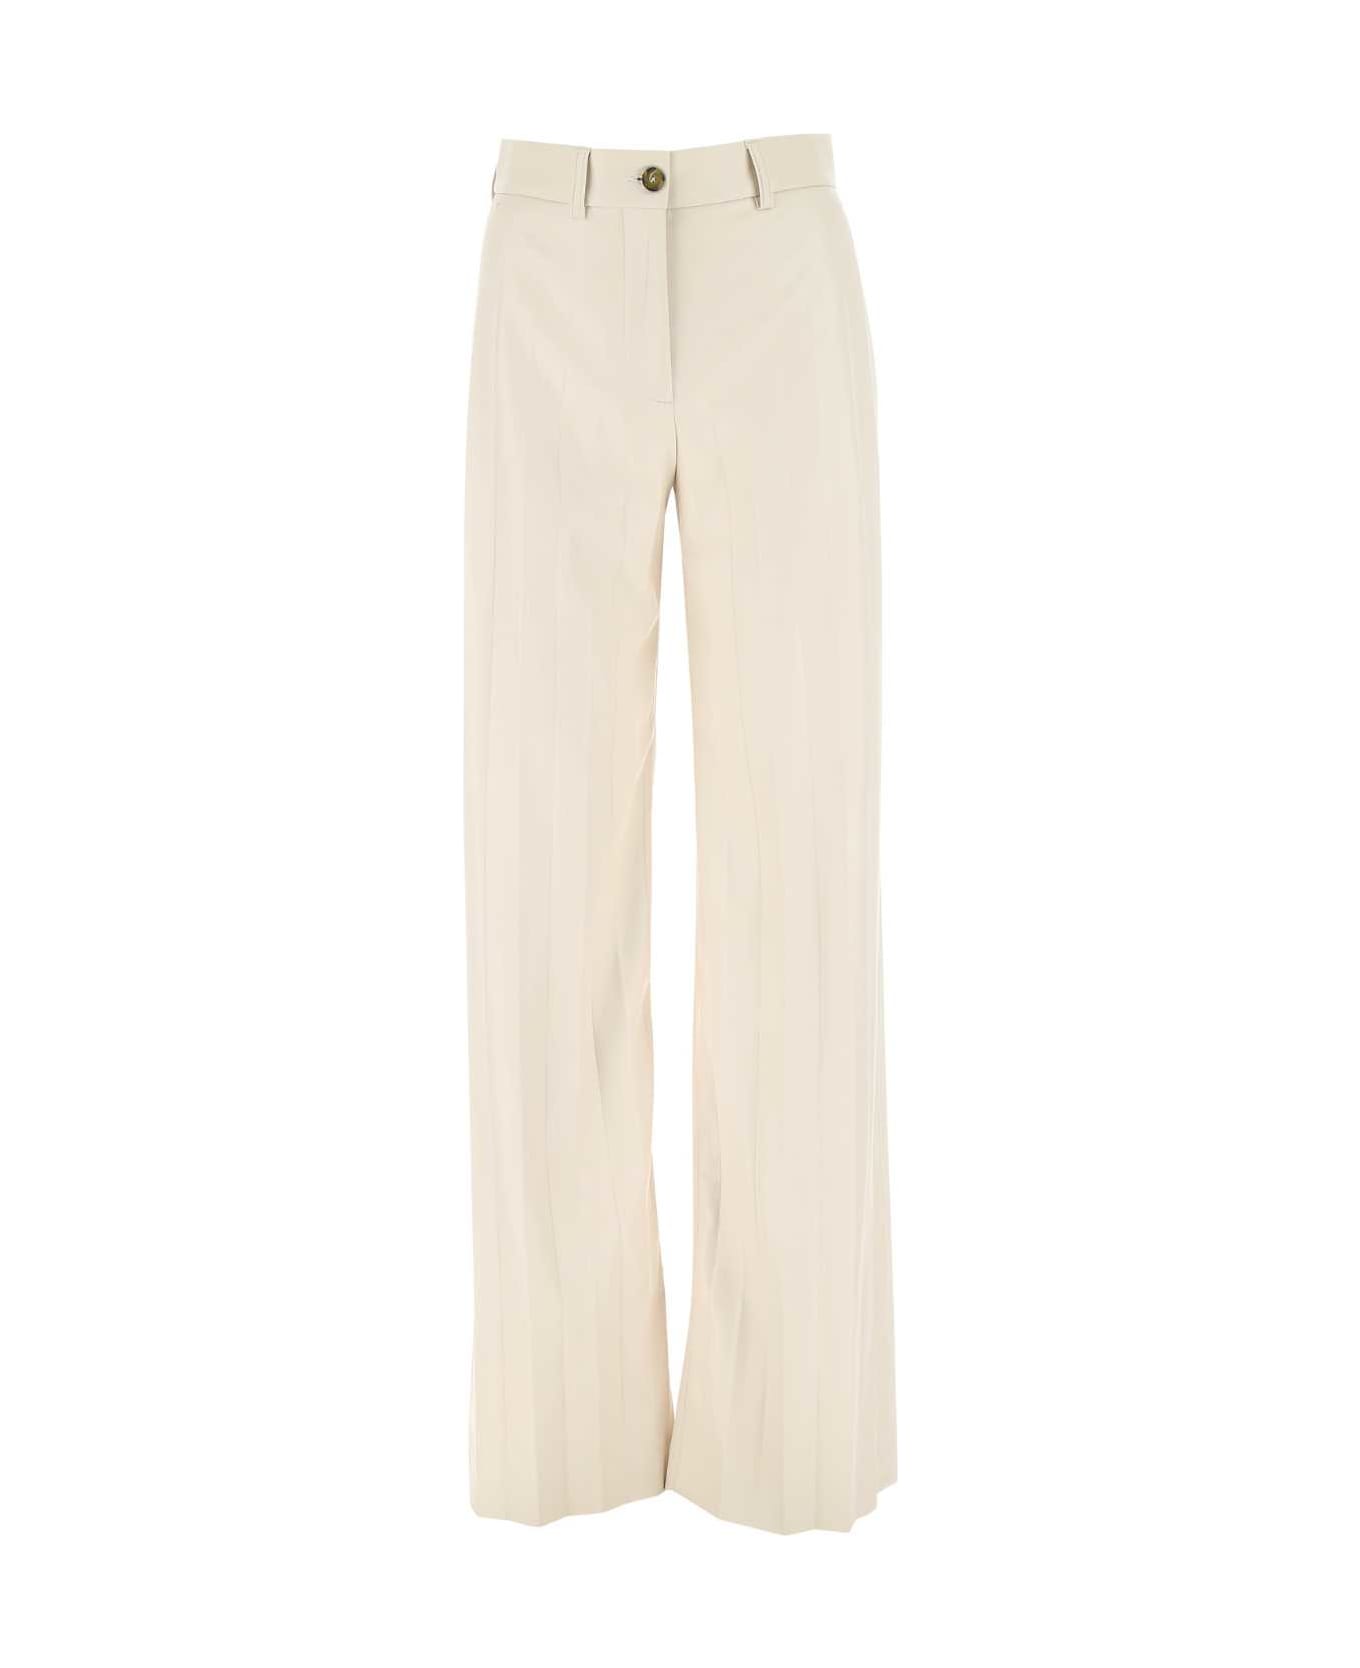 MSGM Ivory Synthetic Leather Pant - 02